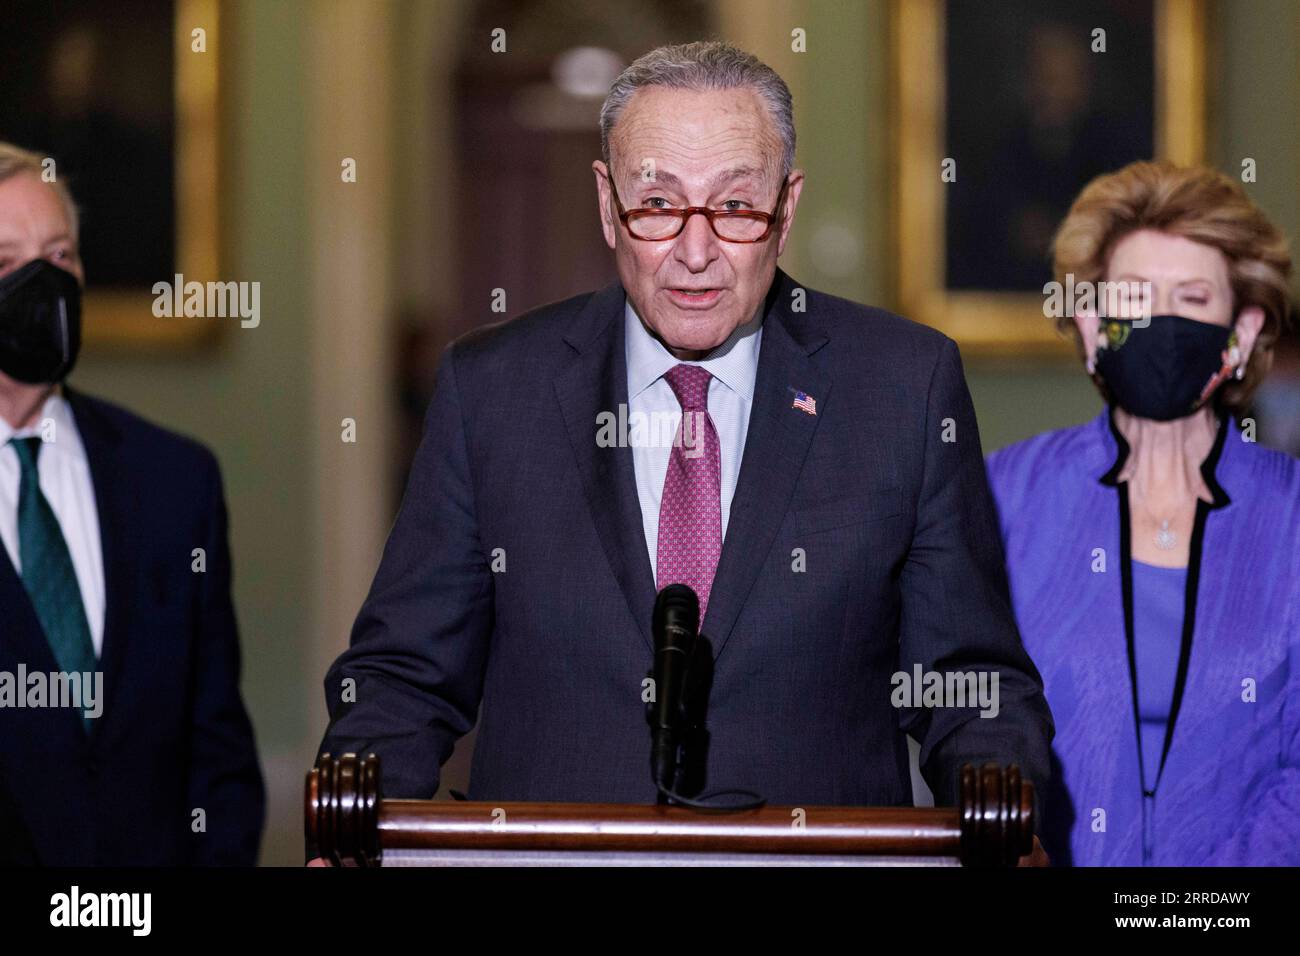 211215 -- WASHINGTON, D.C., Dec. 15, 2021 -- U.S. Senate Majority Leader Chuck Schumer speaks during a press conference on Capitol Hill in Washington, D.C. Dec. 14, 2021. The U.S. Senate on Tuesday approved a measure to lift the nation s borrowing limit by 2.5 trillion U.S. dollars, one day before the deadline set by Treasury Secretary Janet Yellen for lawmakers to take action to prevent a default. Photo by /Xinhua U.S.-WASHINGTON, D.C.-DEBT CEILING TingxShen PUBLICATIONxNOTxINxCHN Stock Photo